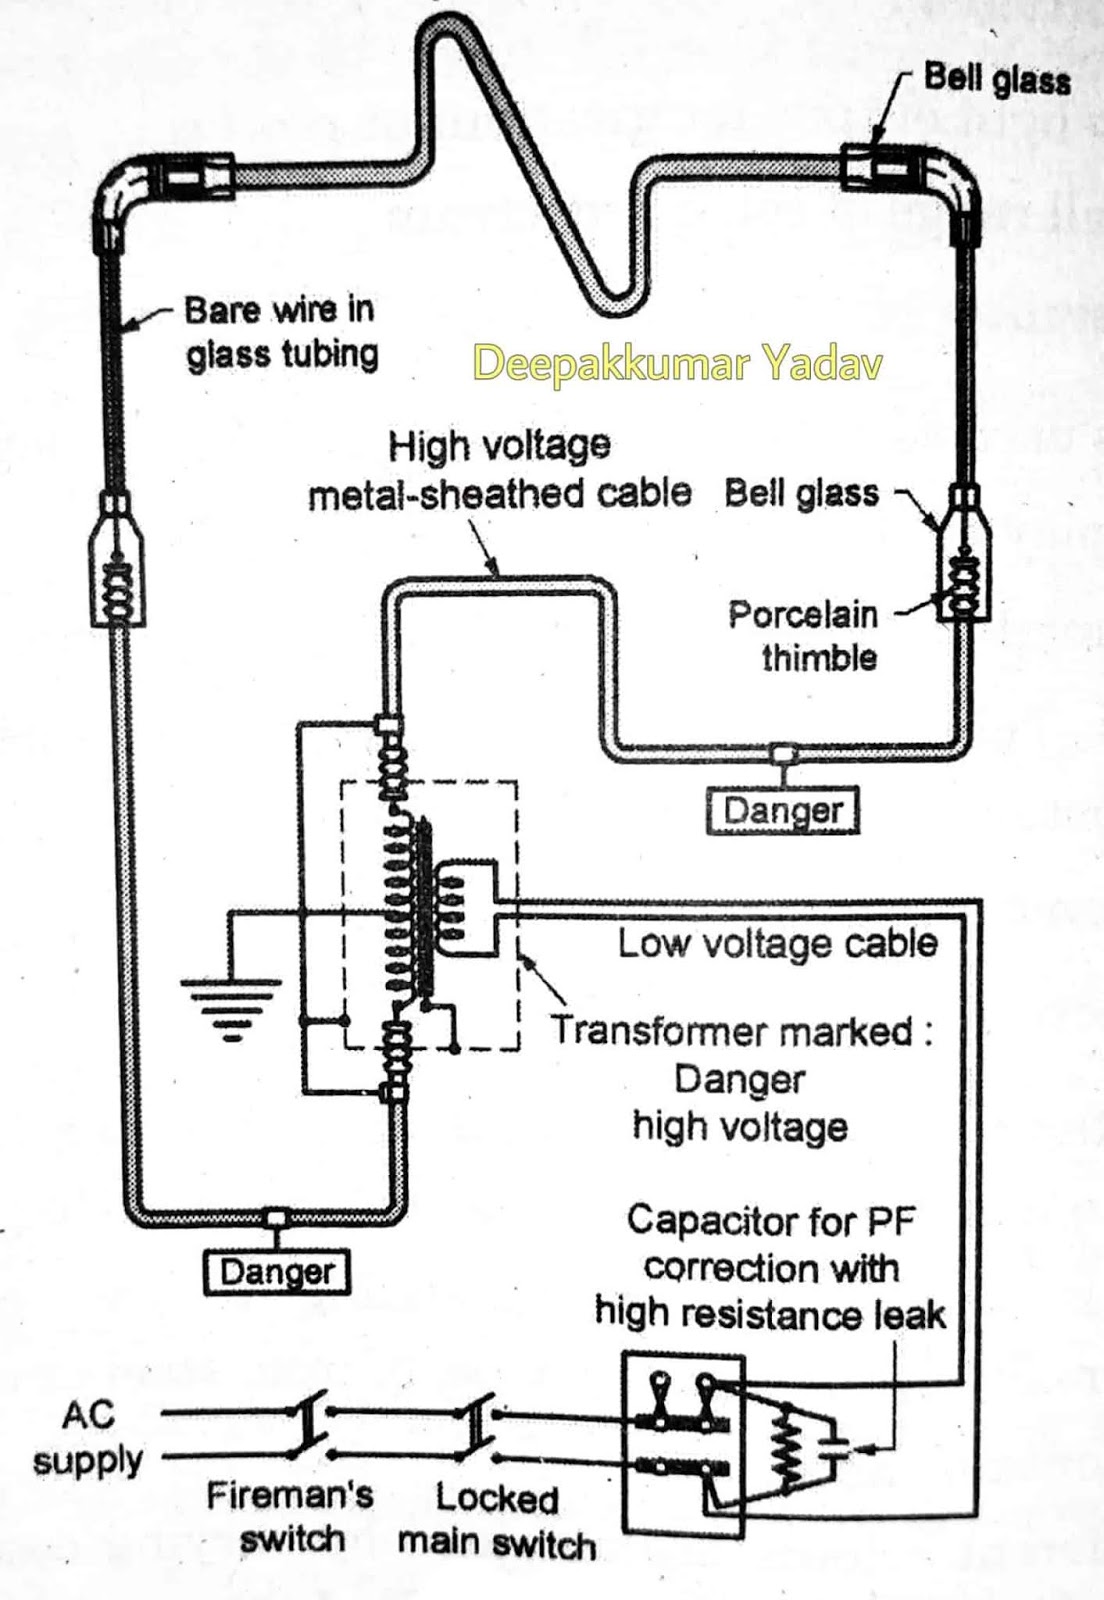 Neon sign tube Lamp Circuit Diagram working Construction and Applications